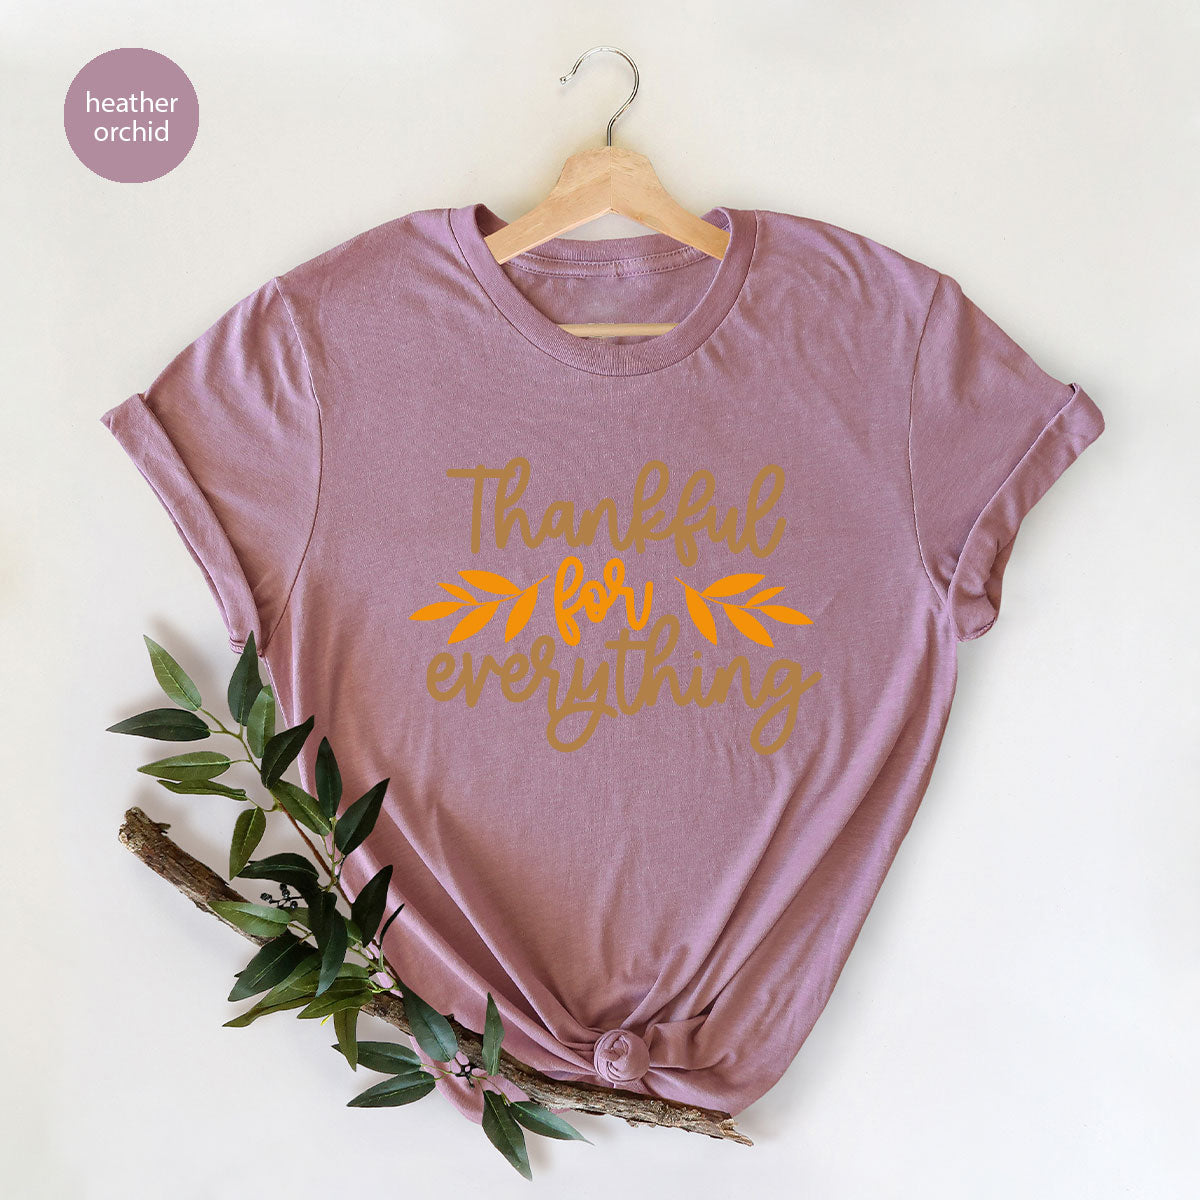 Thanksgiving T Shirts, Gifts for Her, Fall Leaves Graphic Tees, Autumn Clothing, Thankful for Everything T-Shirt, Womens Vneck TShirt